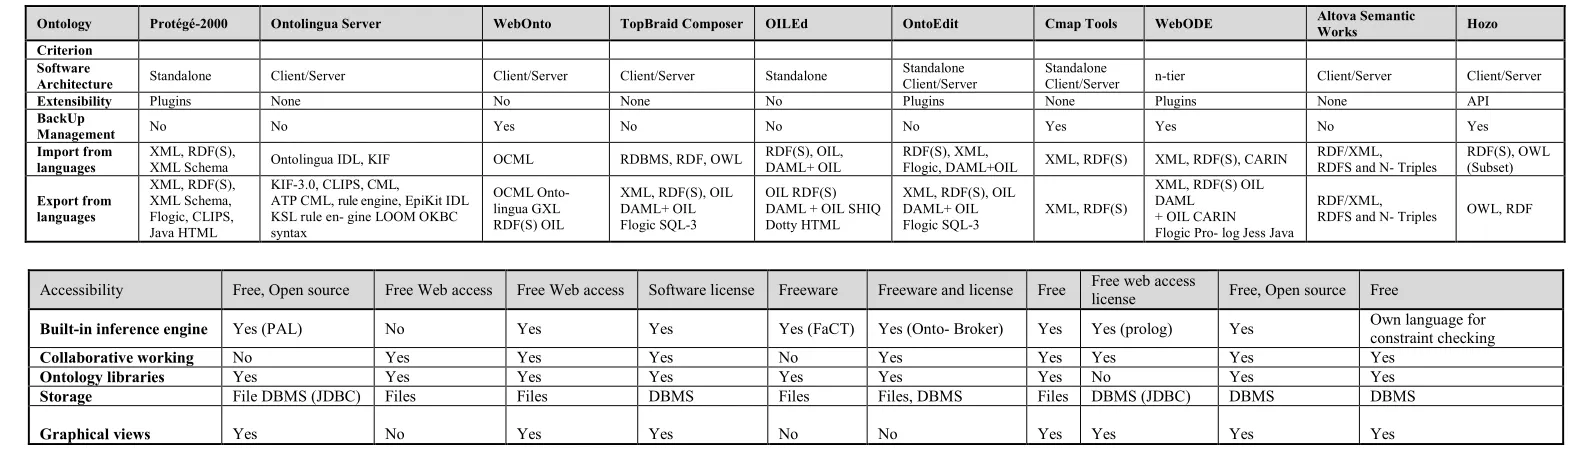 Table 5. Comparison of Ontology Tools (Islam  